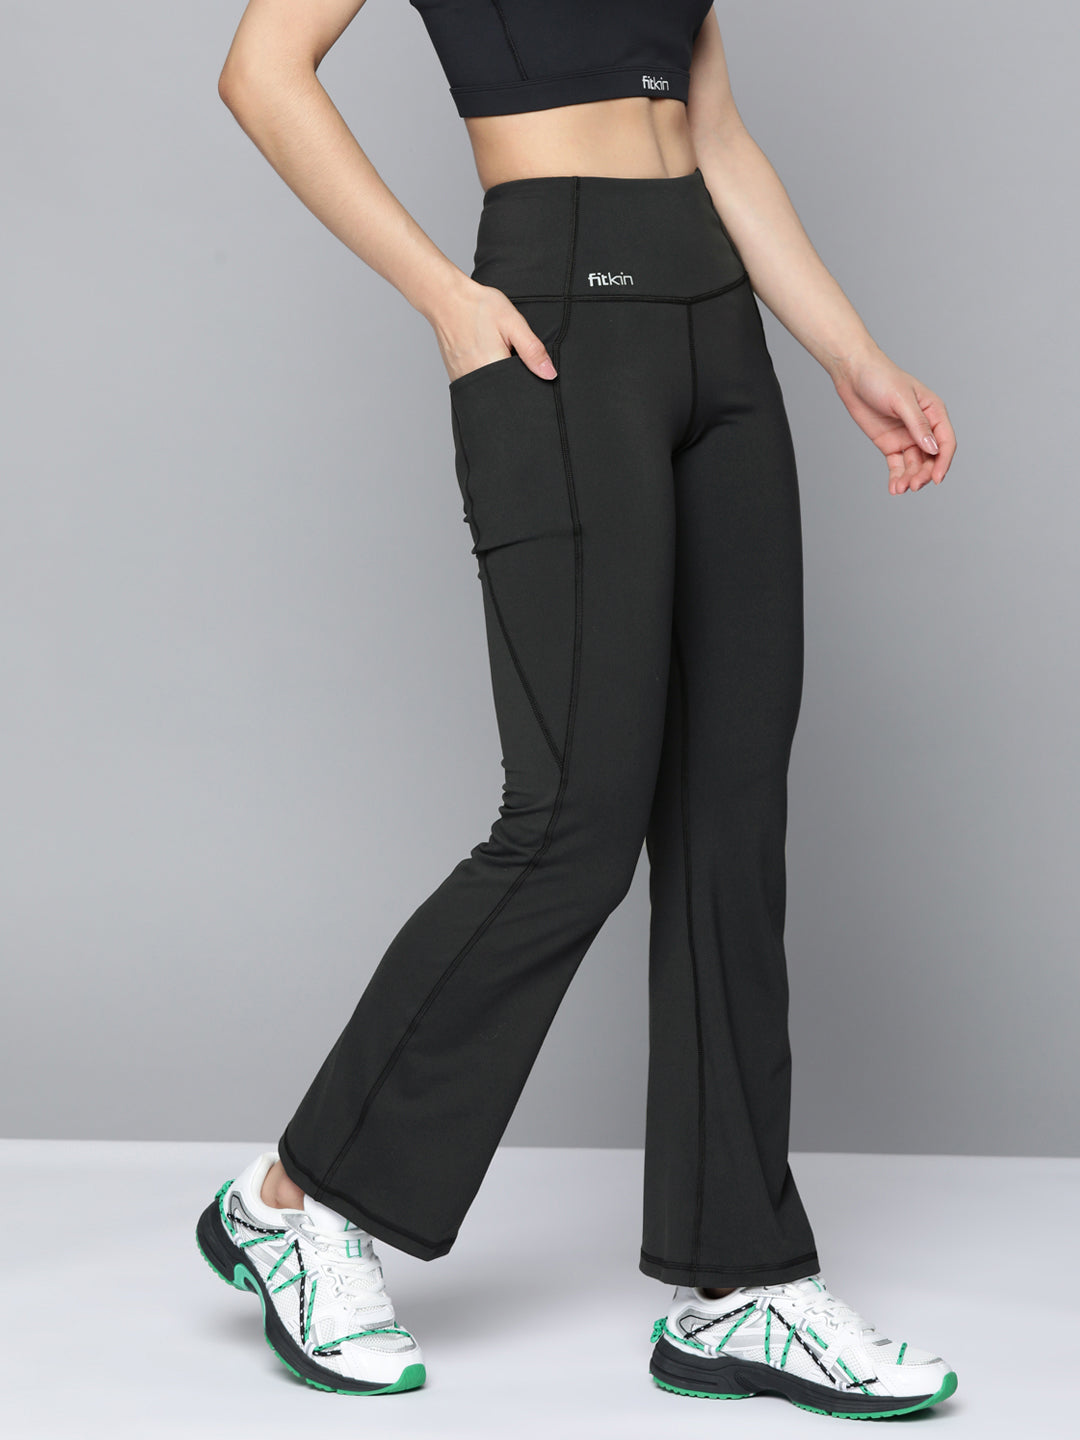 Femea Grey Women Bootcut Track Pants : Amazon.in: Clothing & Accessories